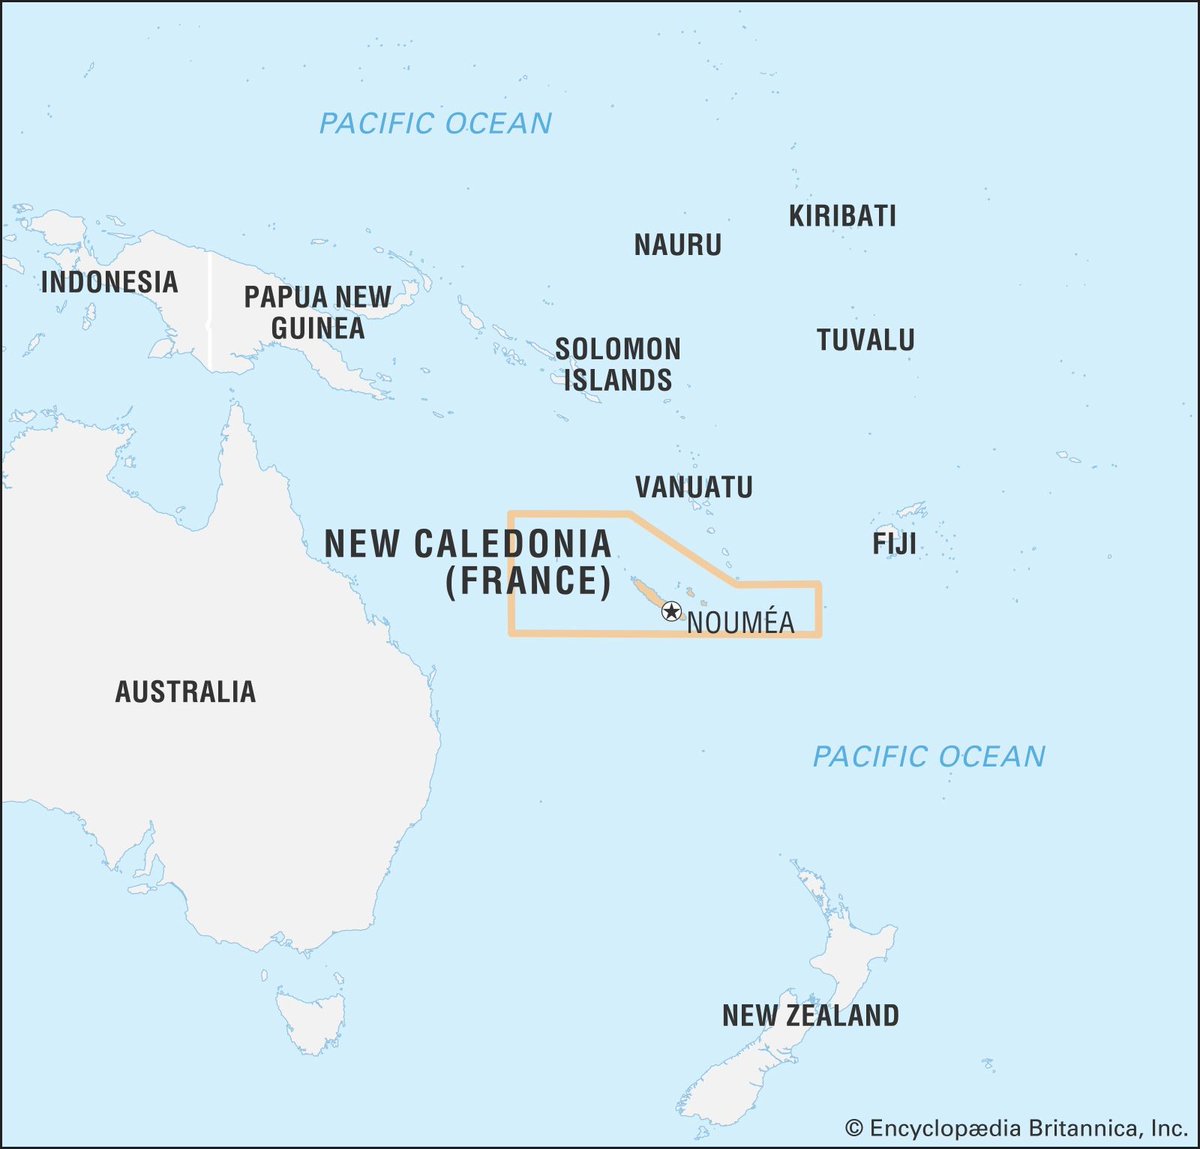 Places in the news:

New Caledonia